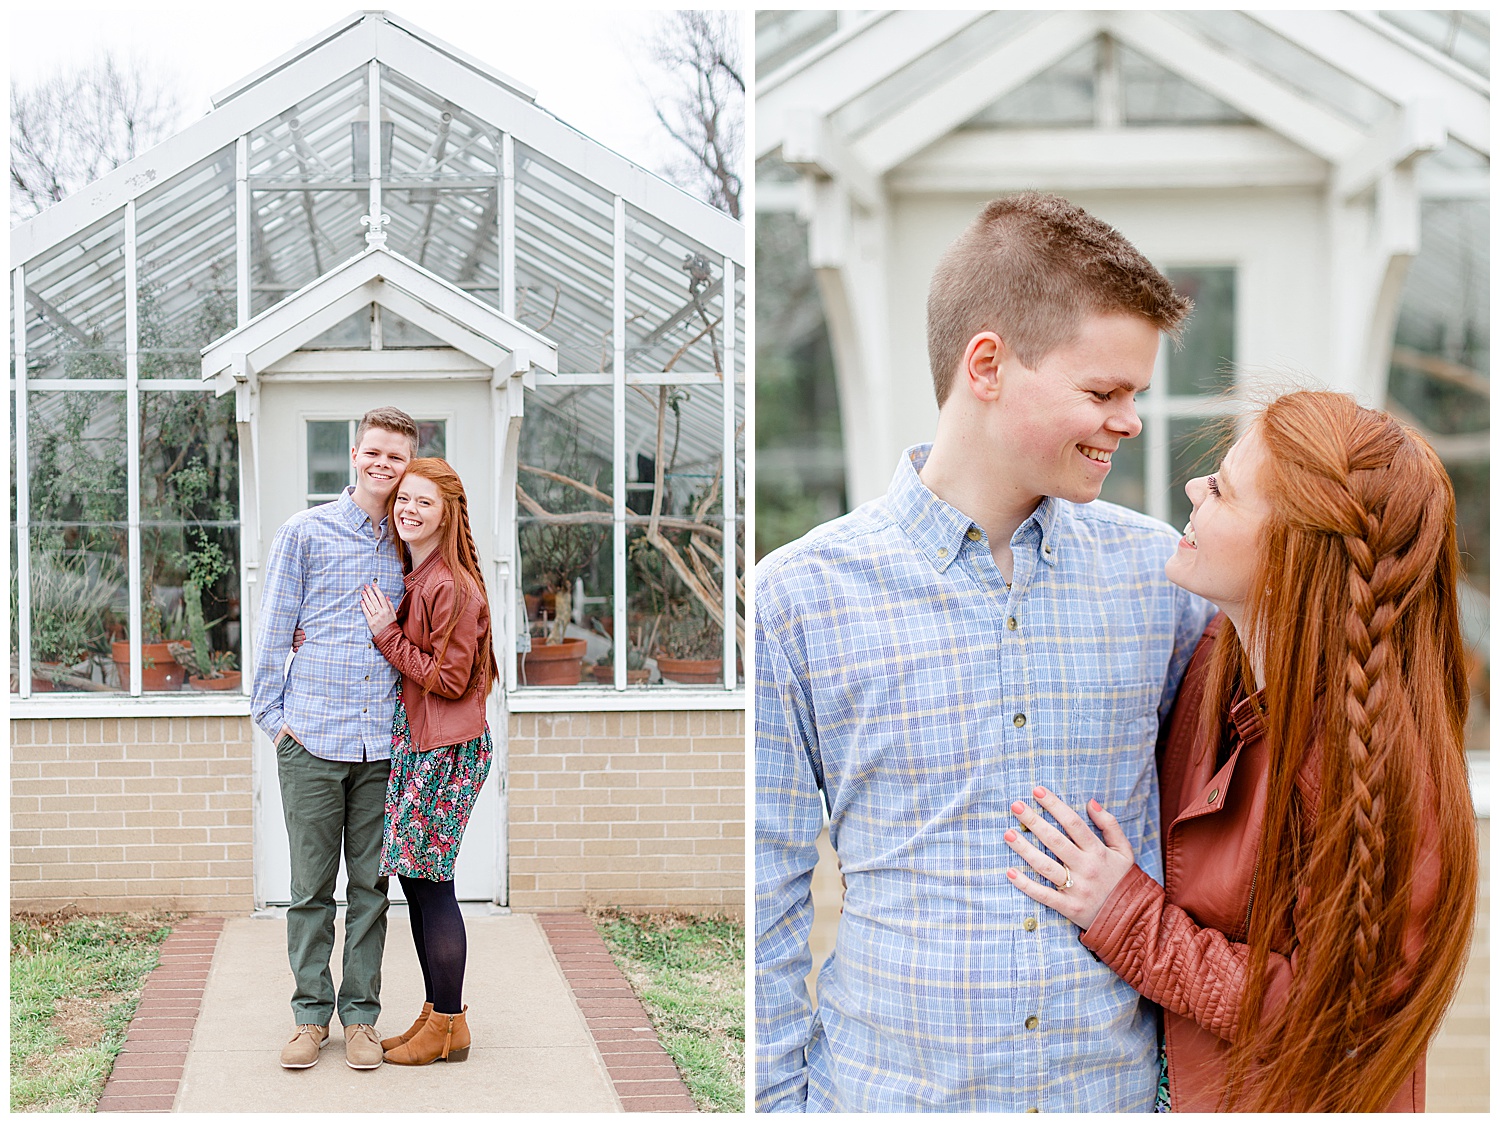 Ashley and Grant in front of a greenhouse during their spring engagement session.